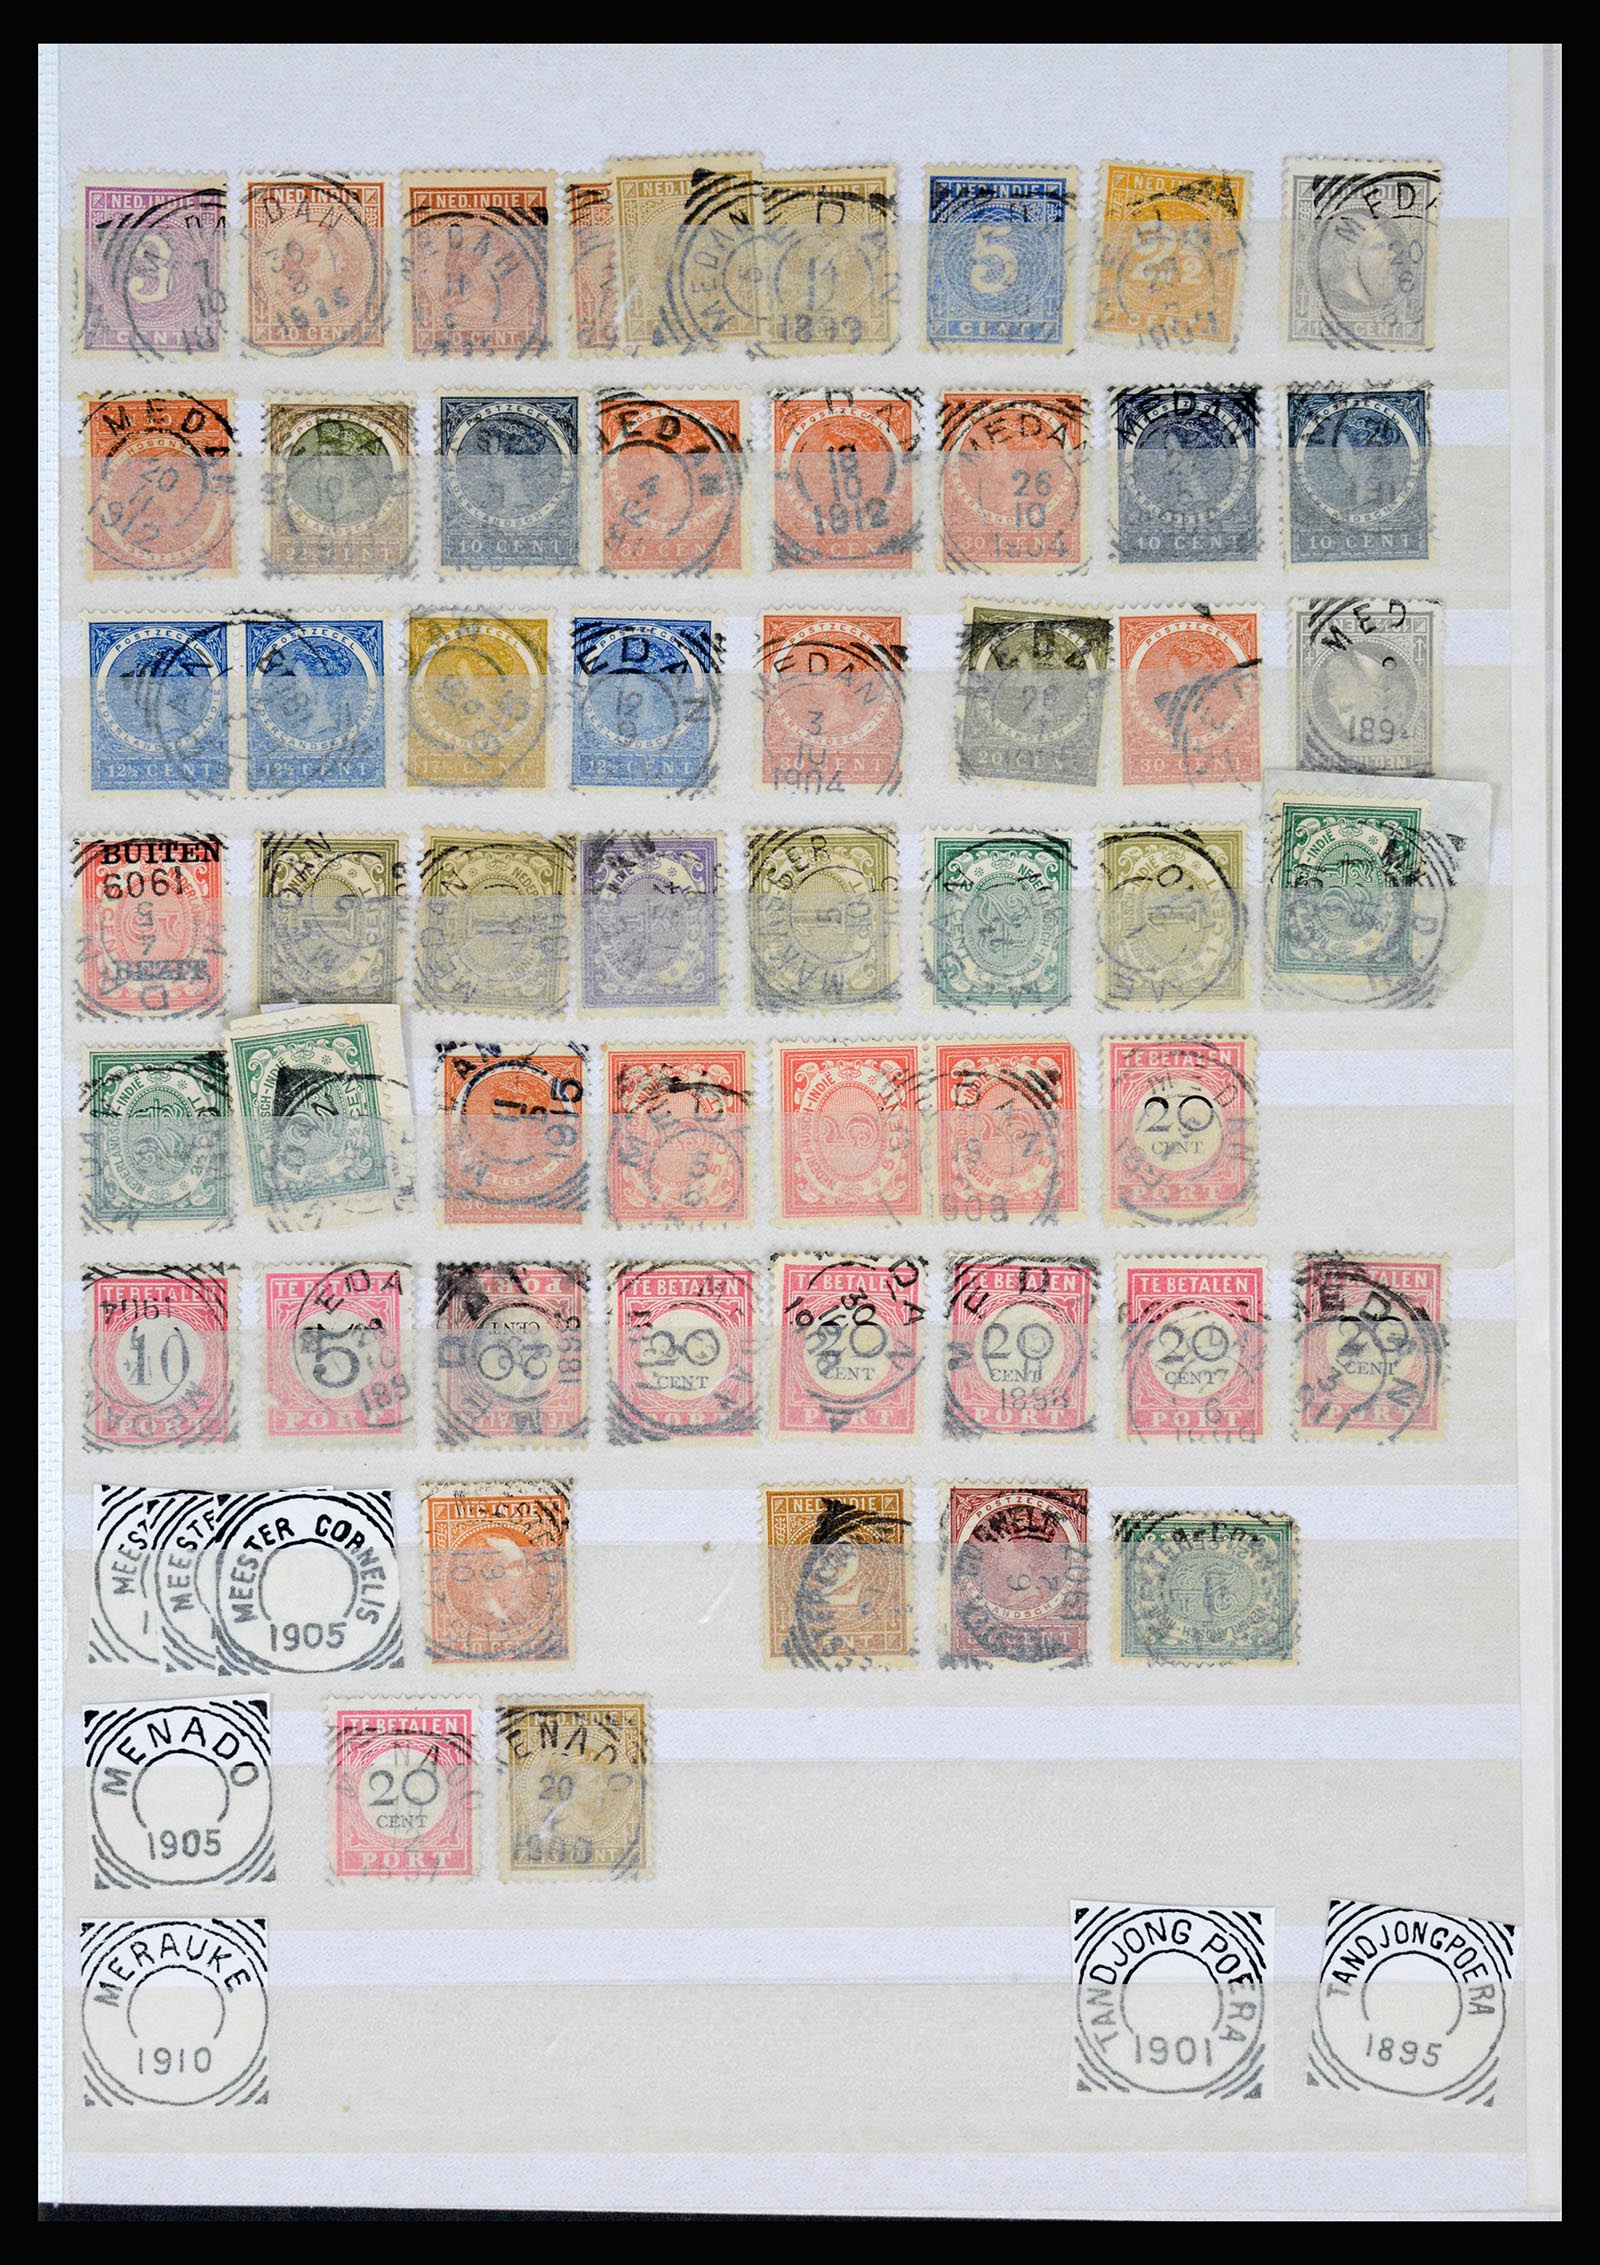 36839 078 - Stamp collection 36839 Dutch east Indies square cancels.